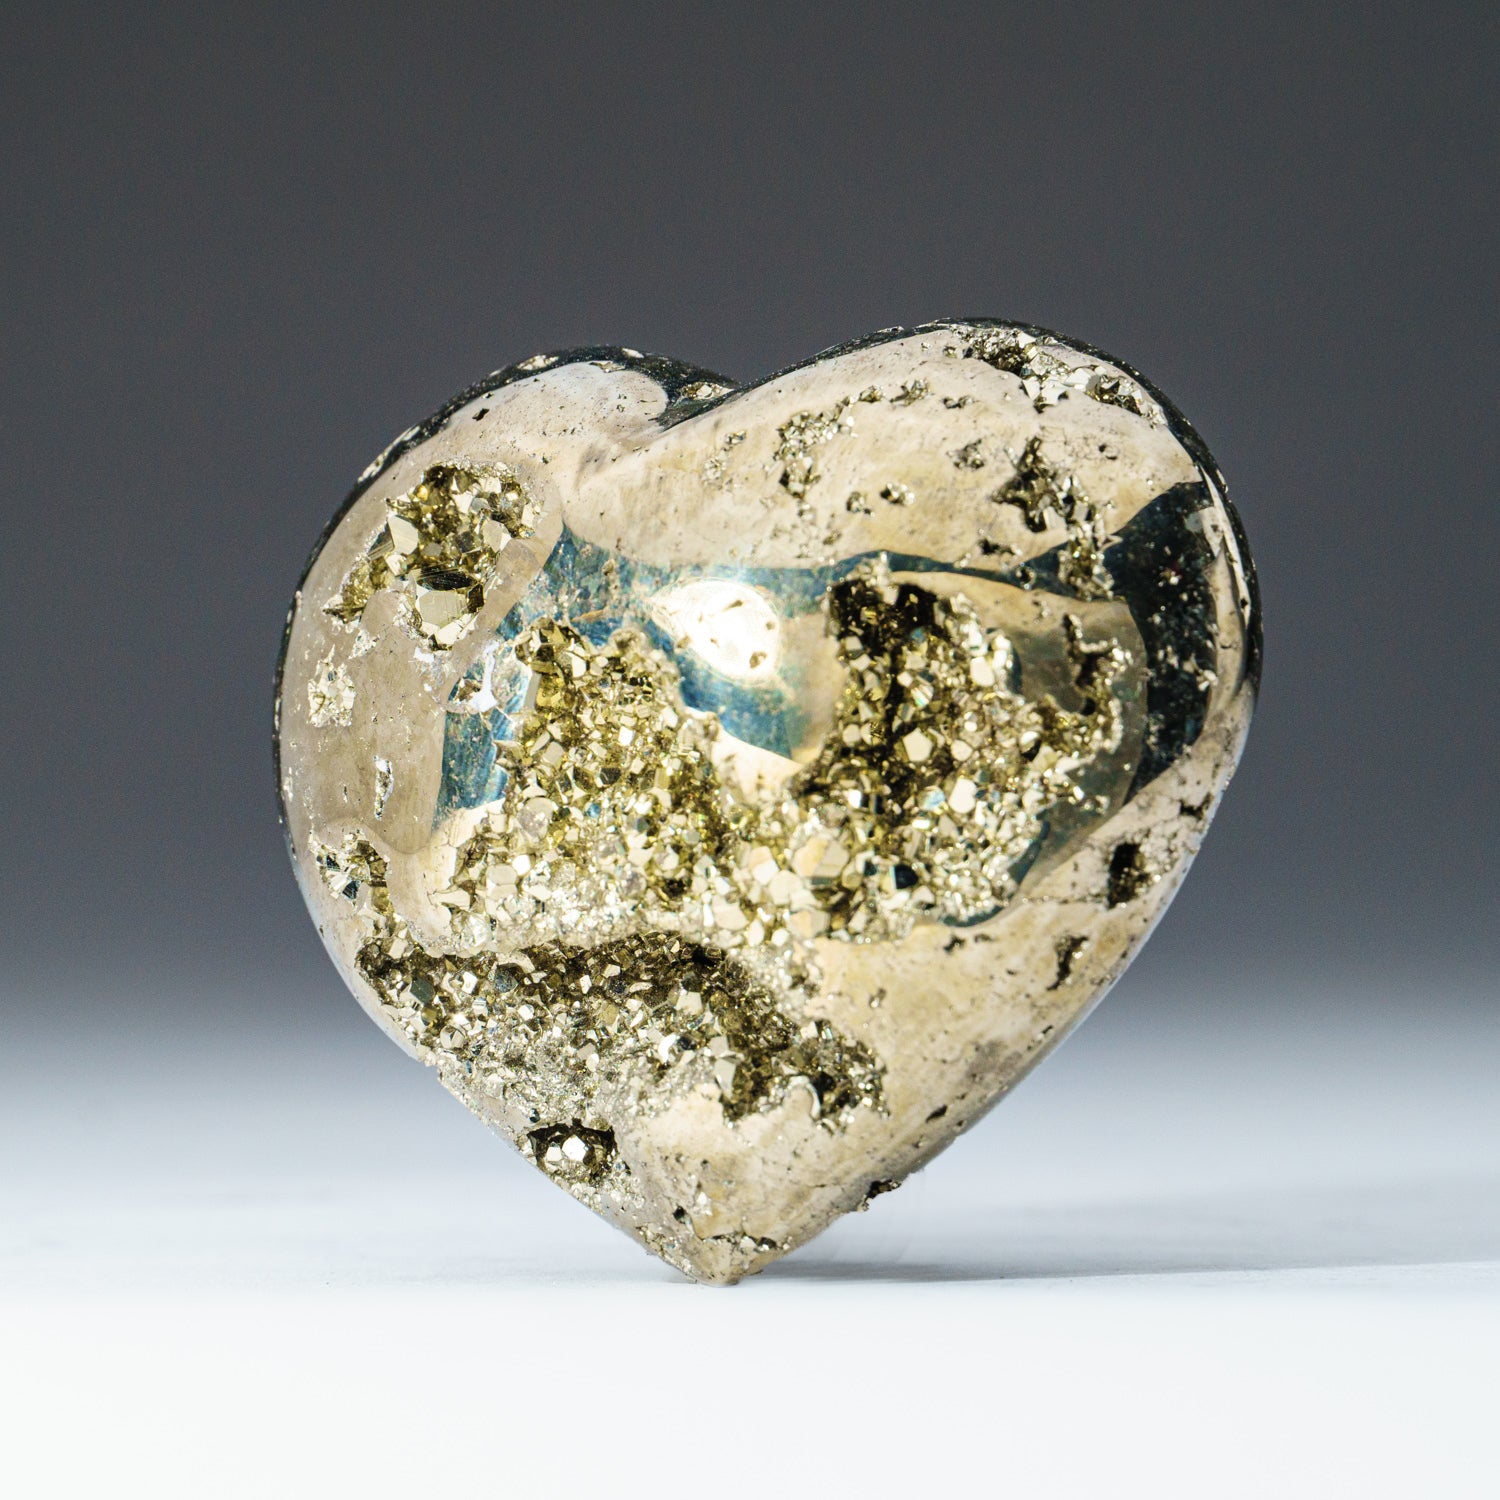 Polished Pyrite Heart from Peru (193 grams)